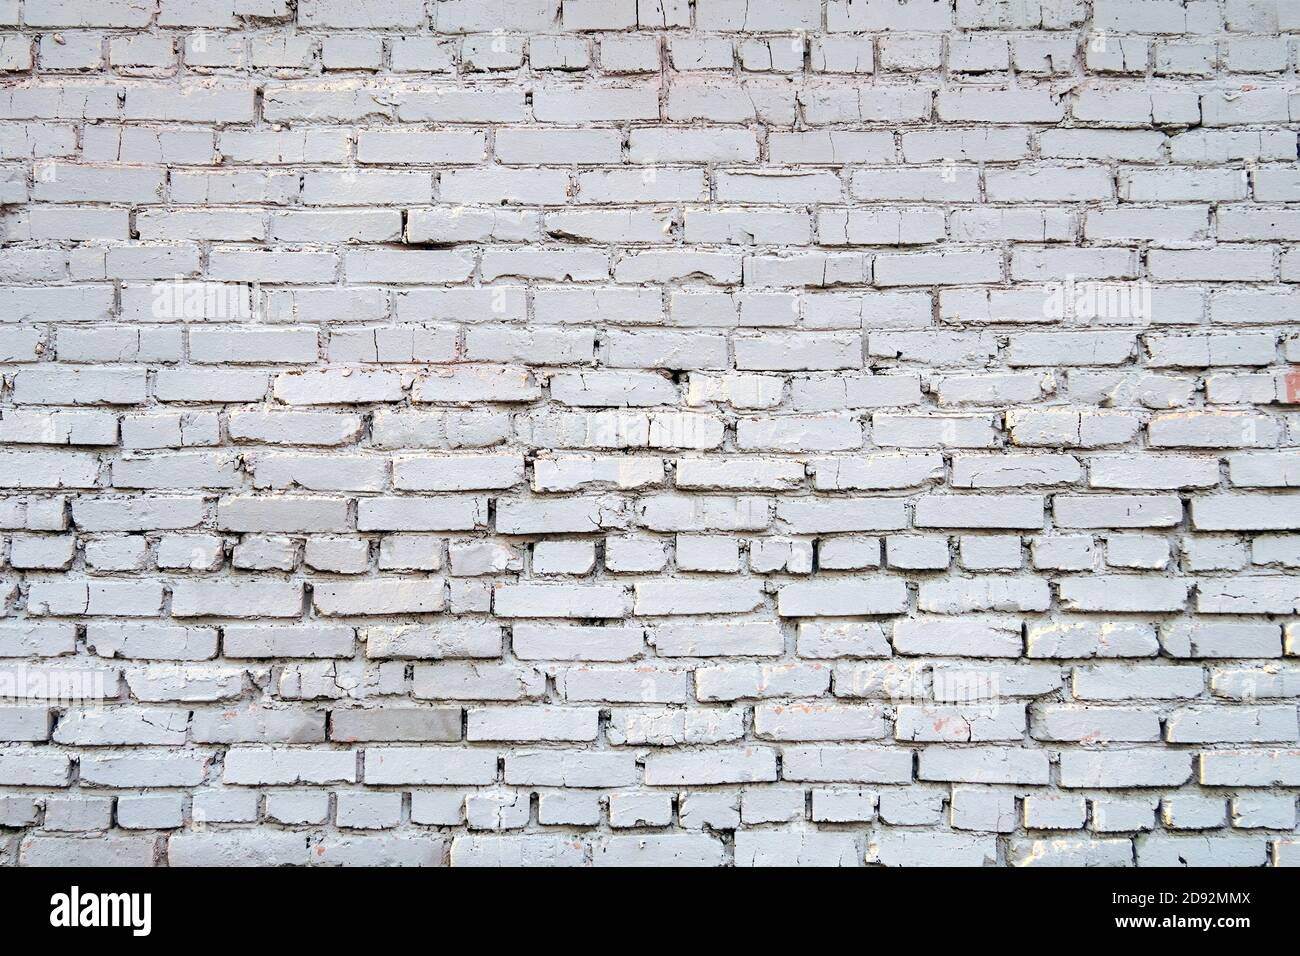 White brick wall. Empty horizontal background with old bricks and mortar. Copy space for text Stock Photo